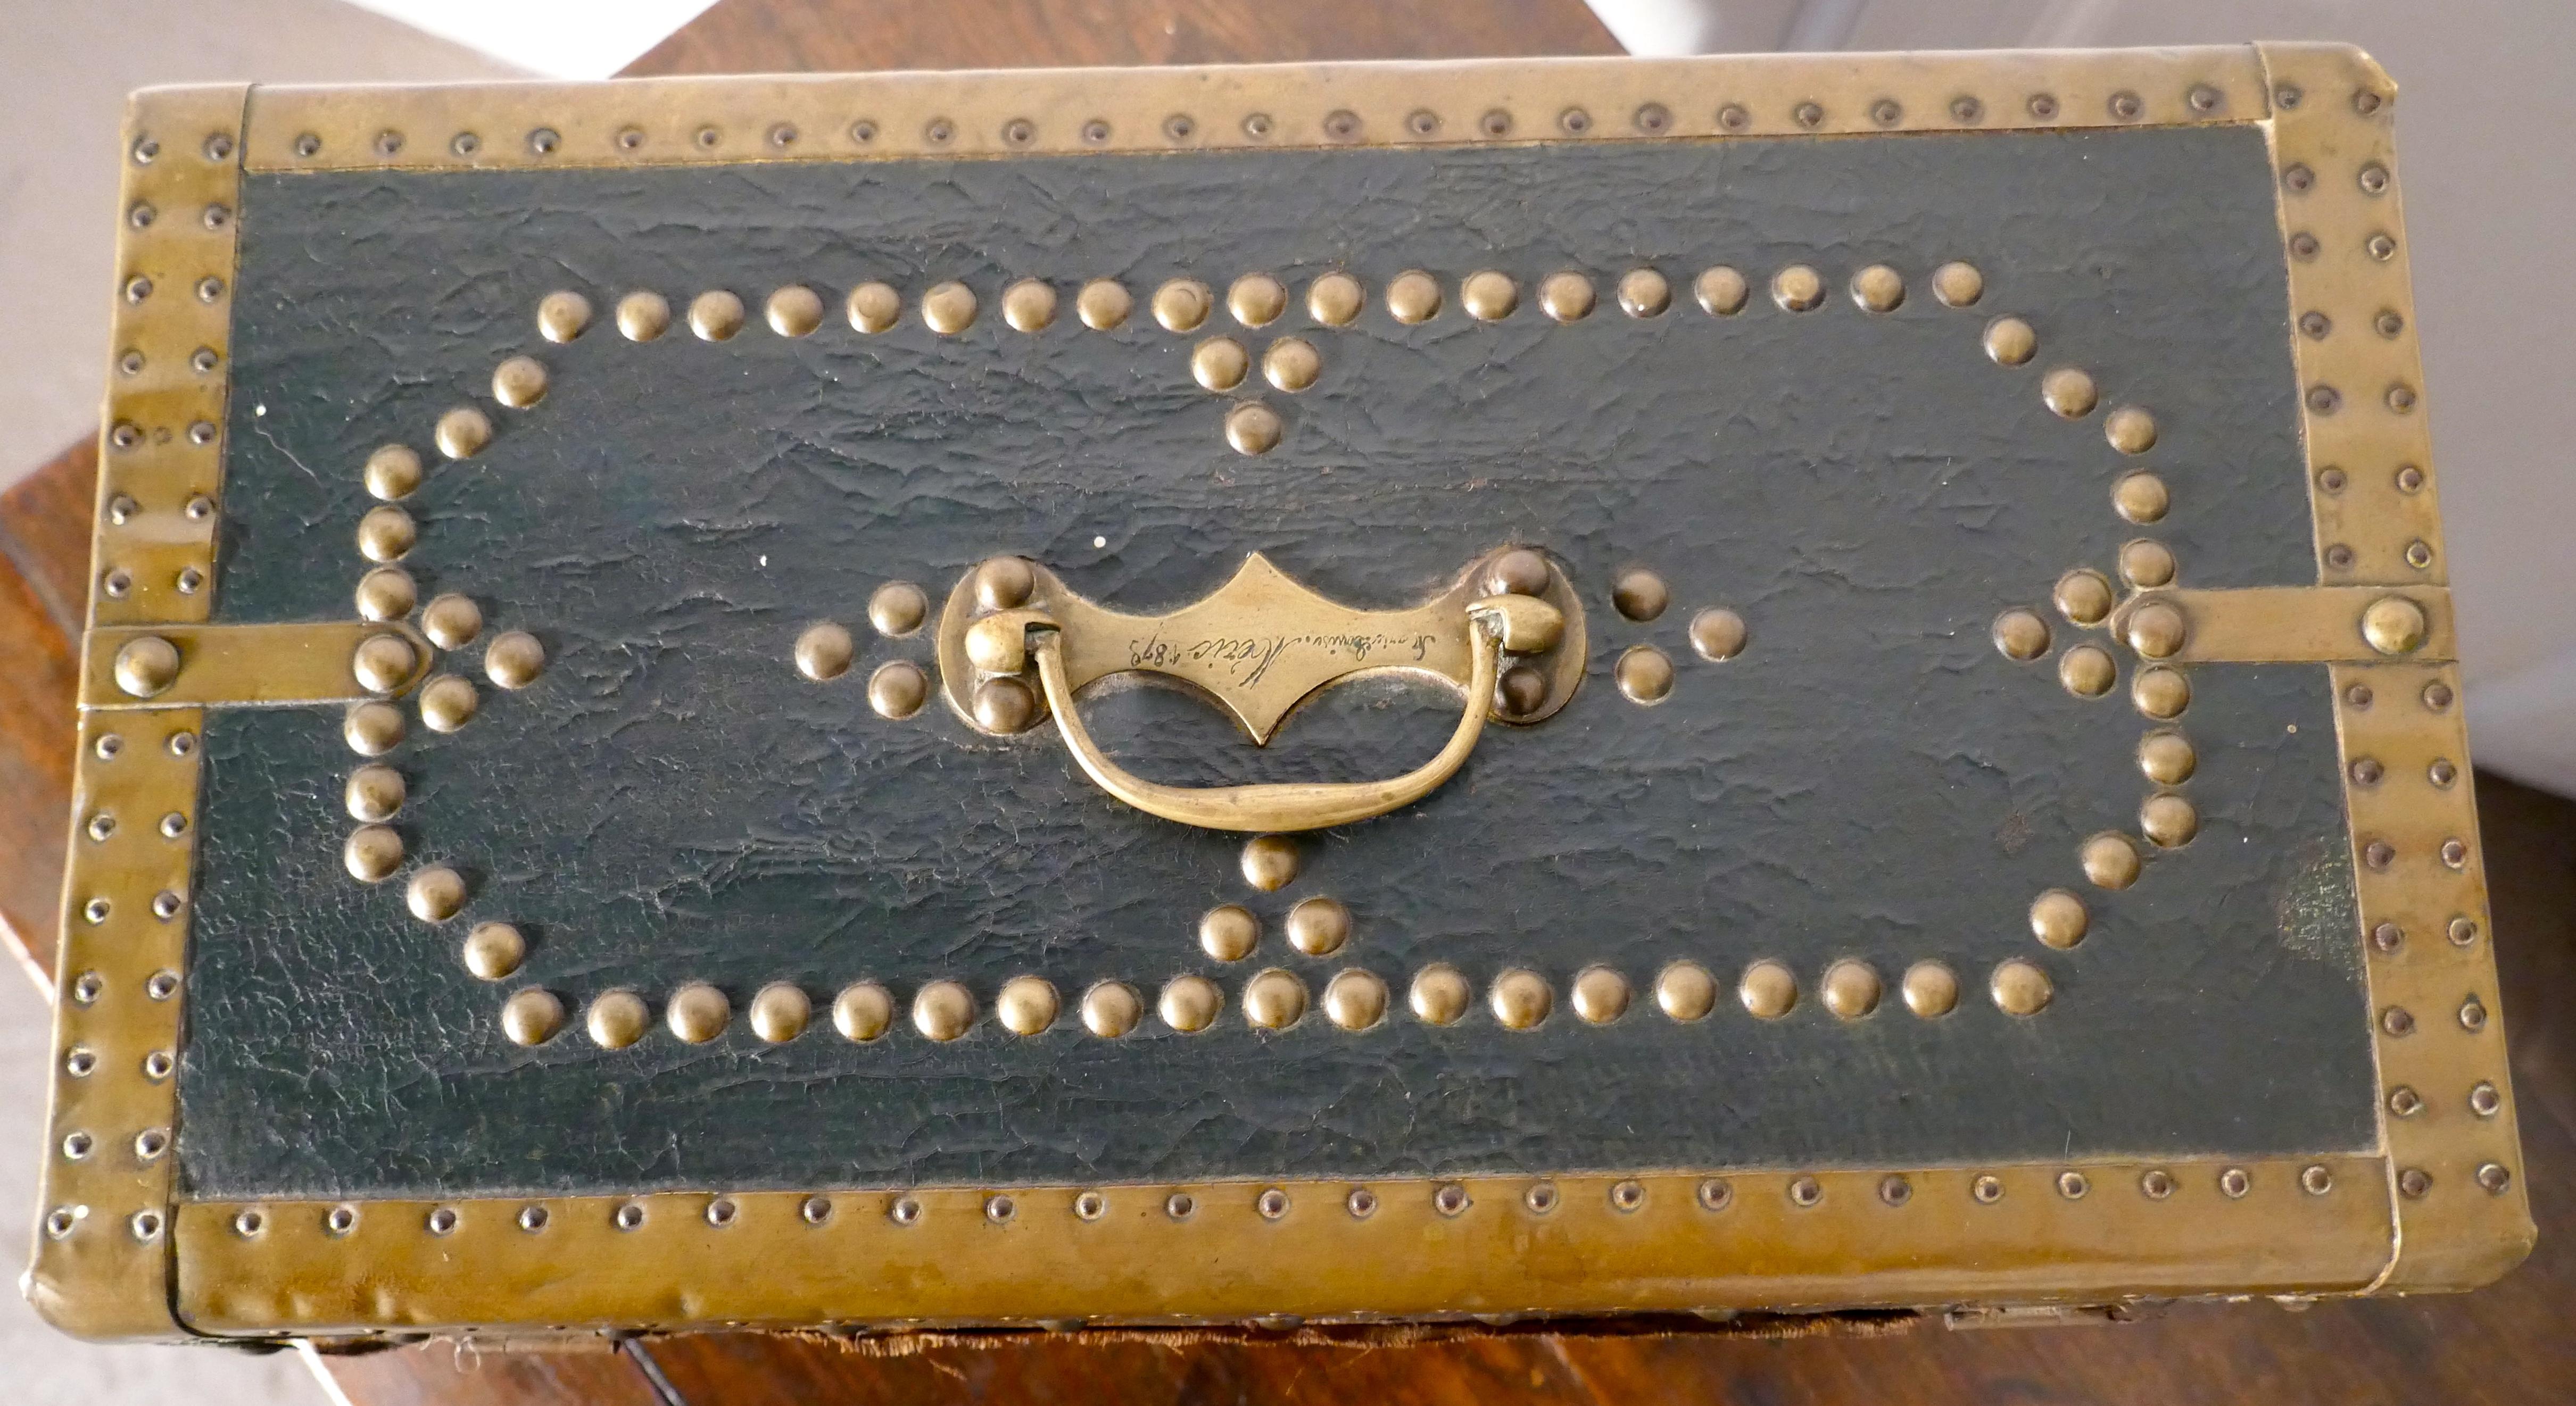 Leather and brass studded treasure chest or jewellery box 1878

This is a very attractive piece, it is leather covered and heavily bound in Brass with much brass stud work decoration, the chest has a top carrying handle and there is an inscription